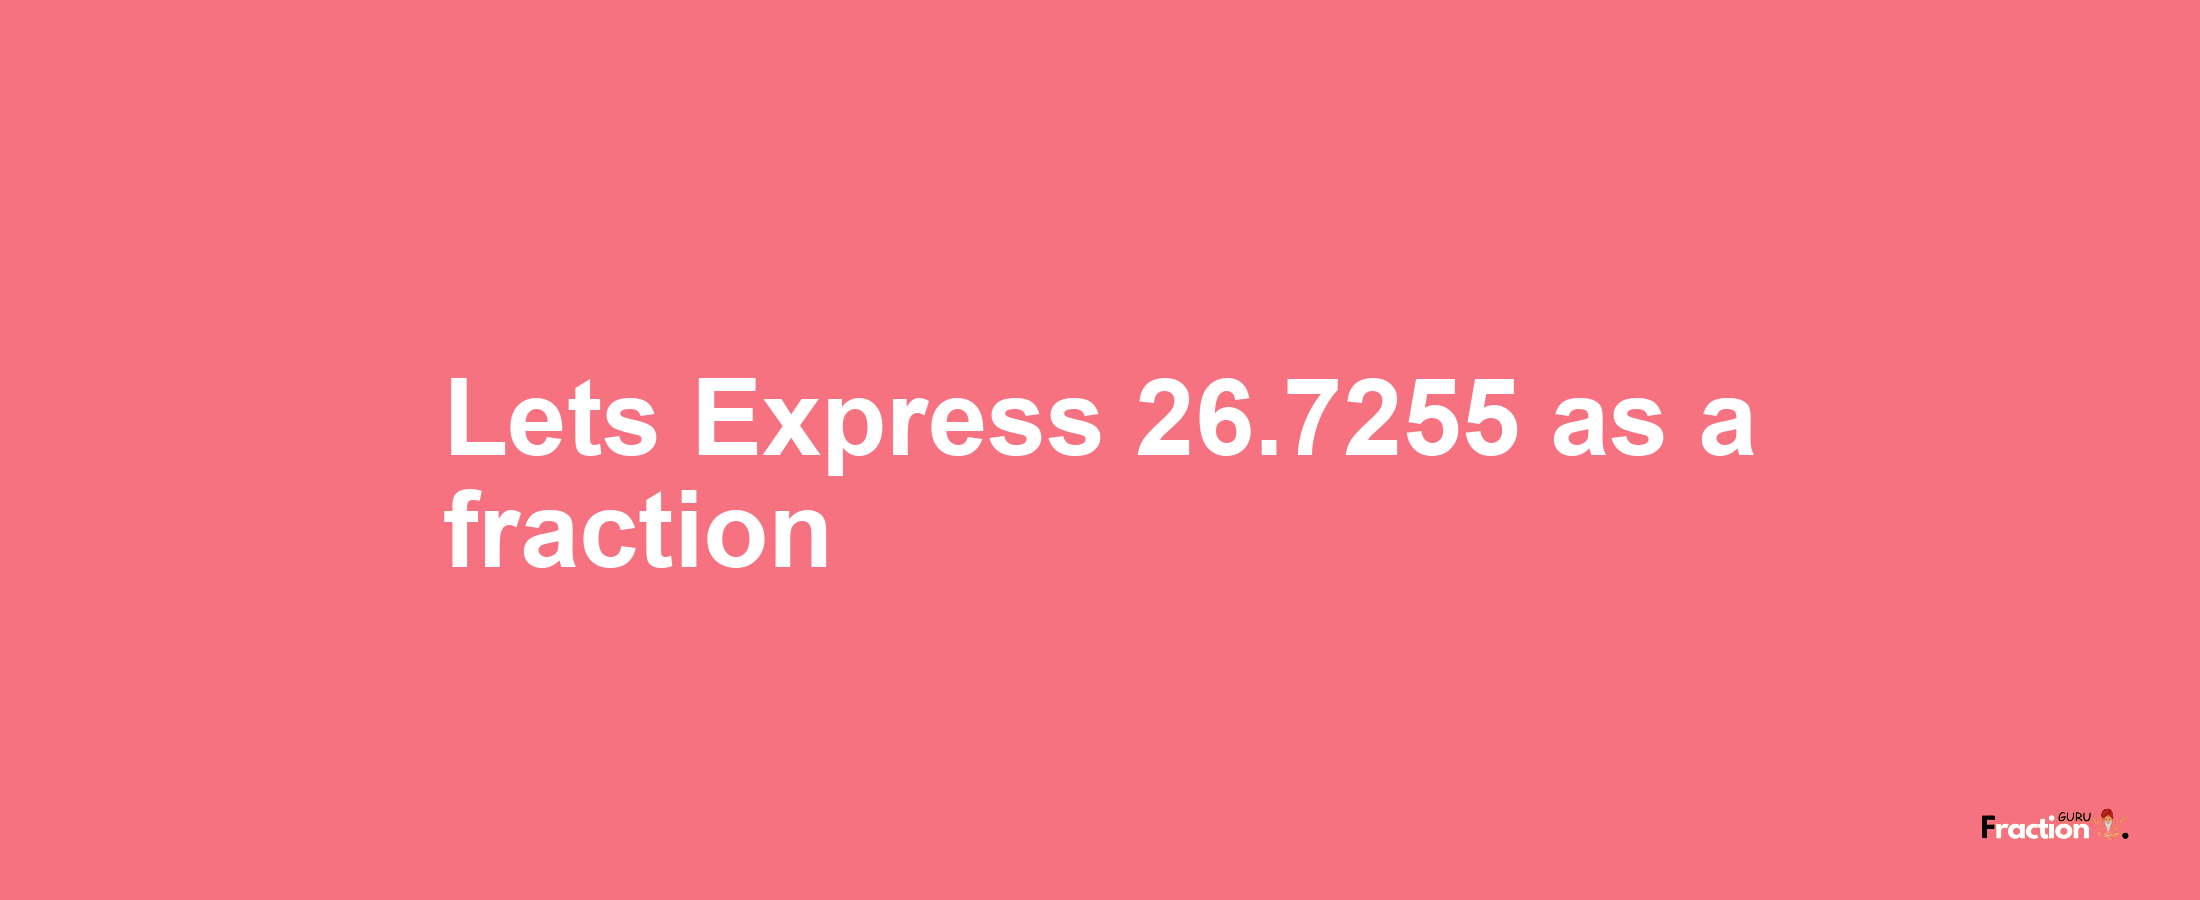 Lets Express 26.7255 as afraction